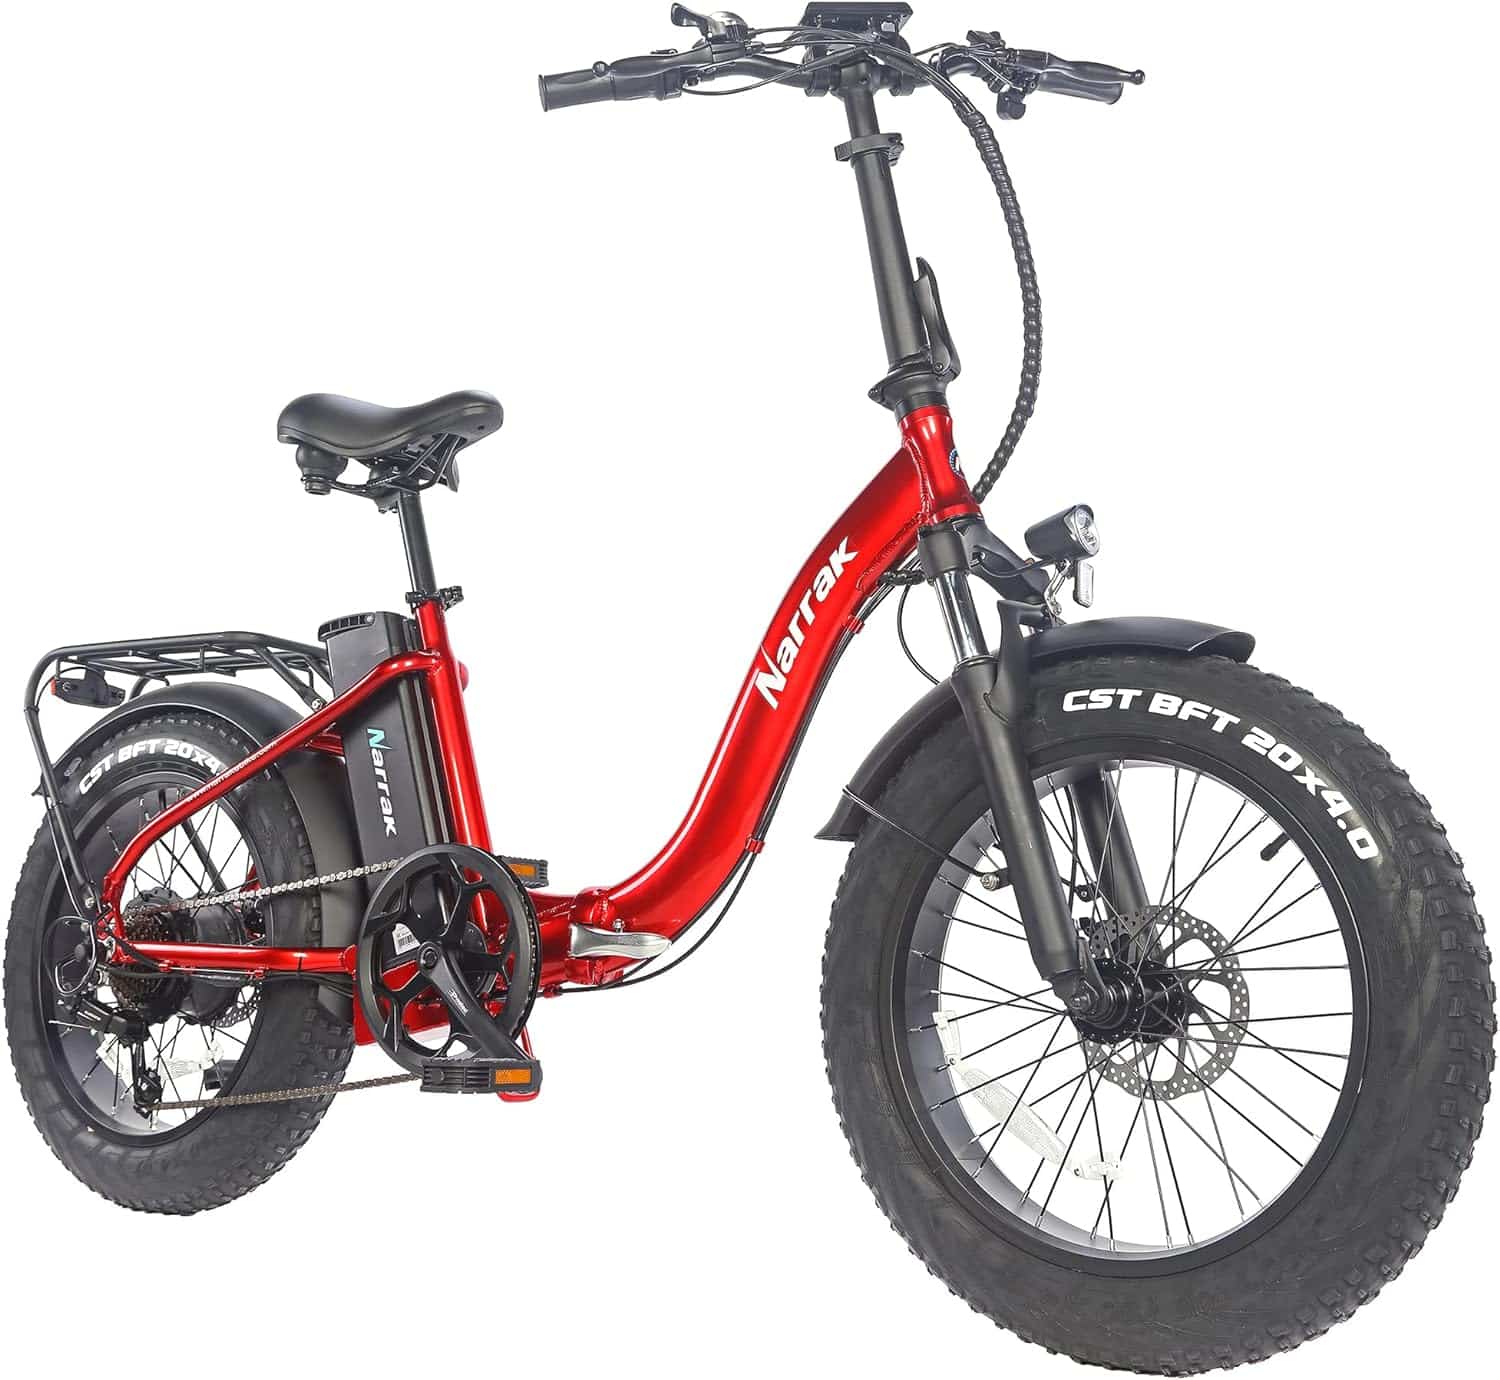 Narrak Electric Bicycles 500W/750W Brushless Motor: A Comprehensive Review